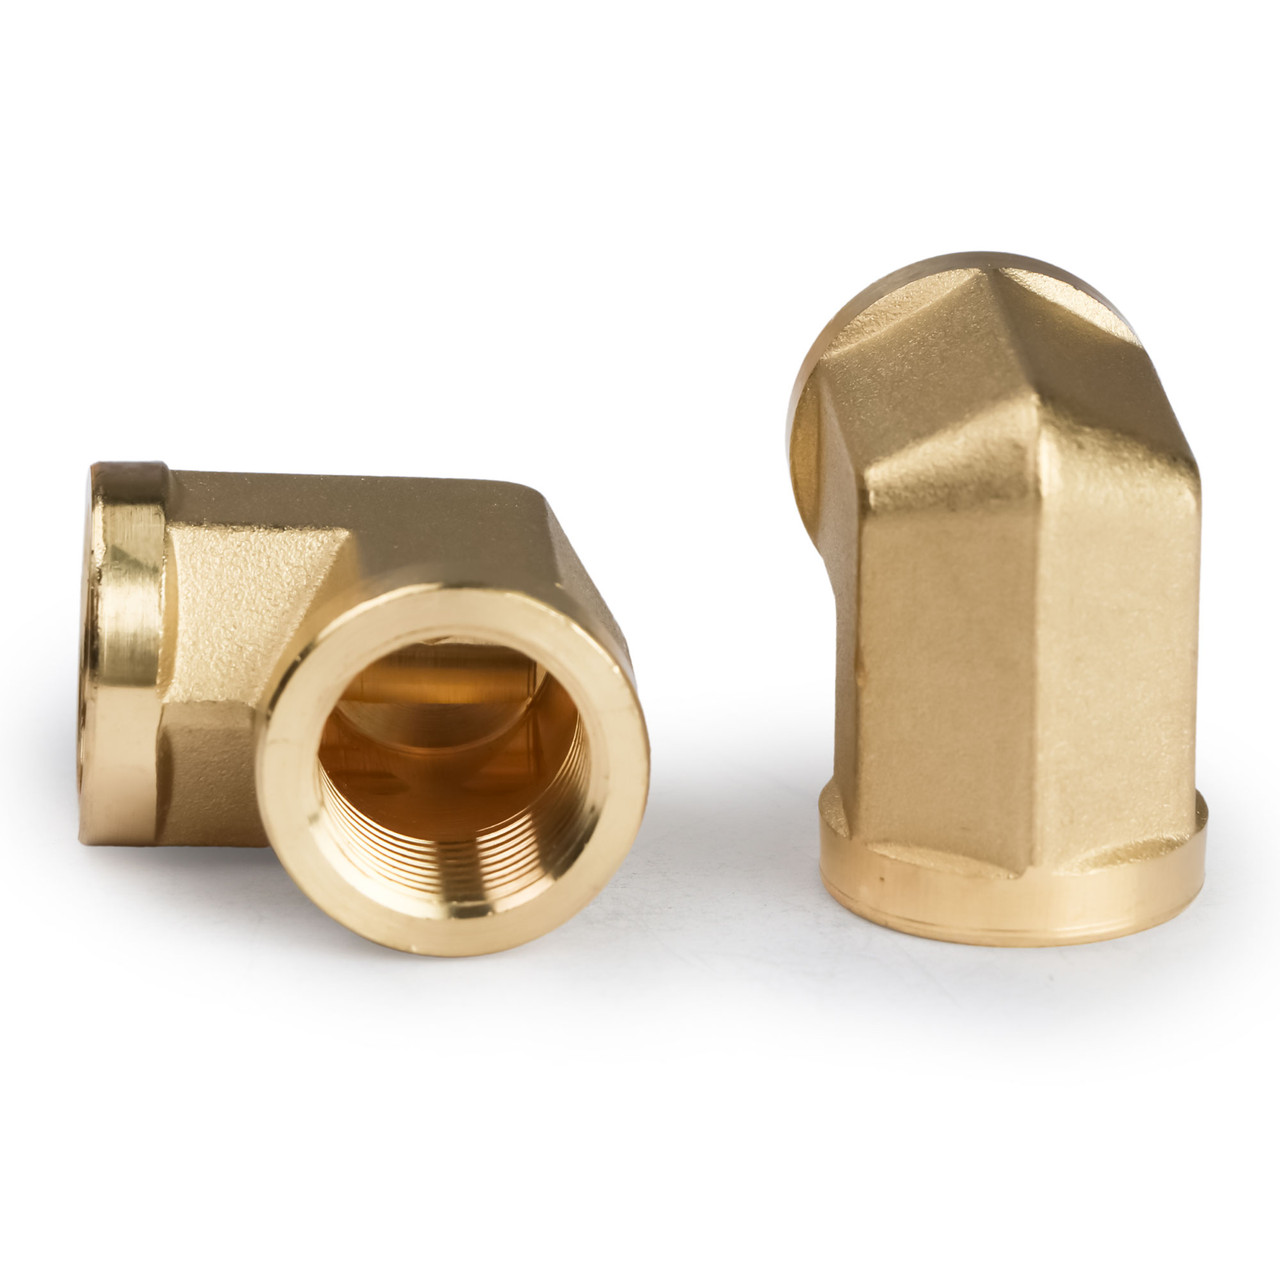 Legines 90 Degree Brass Street Elbow 1/4 NPT Male x 1/4 NPT Female Forged Pipe  Fitting (Pack of 5) 